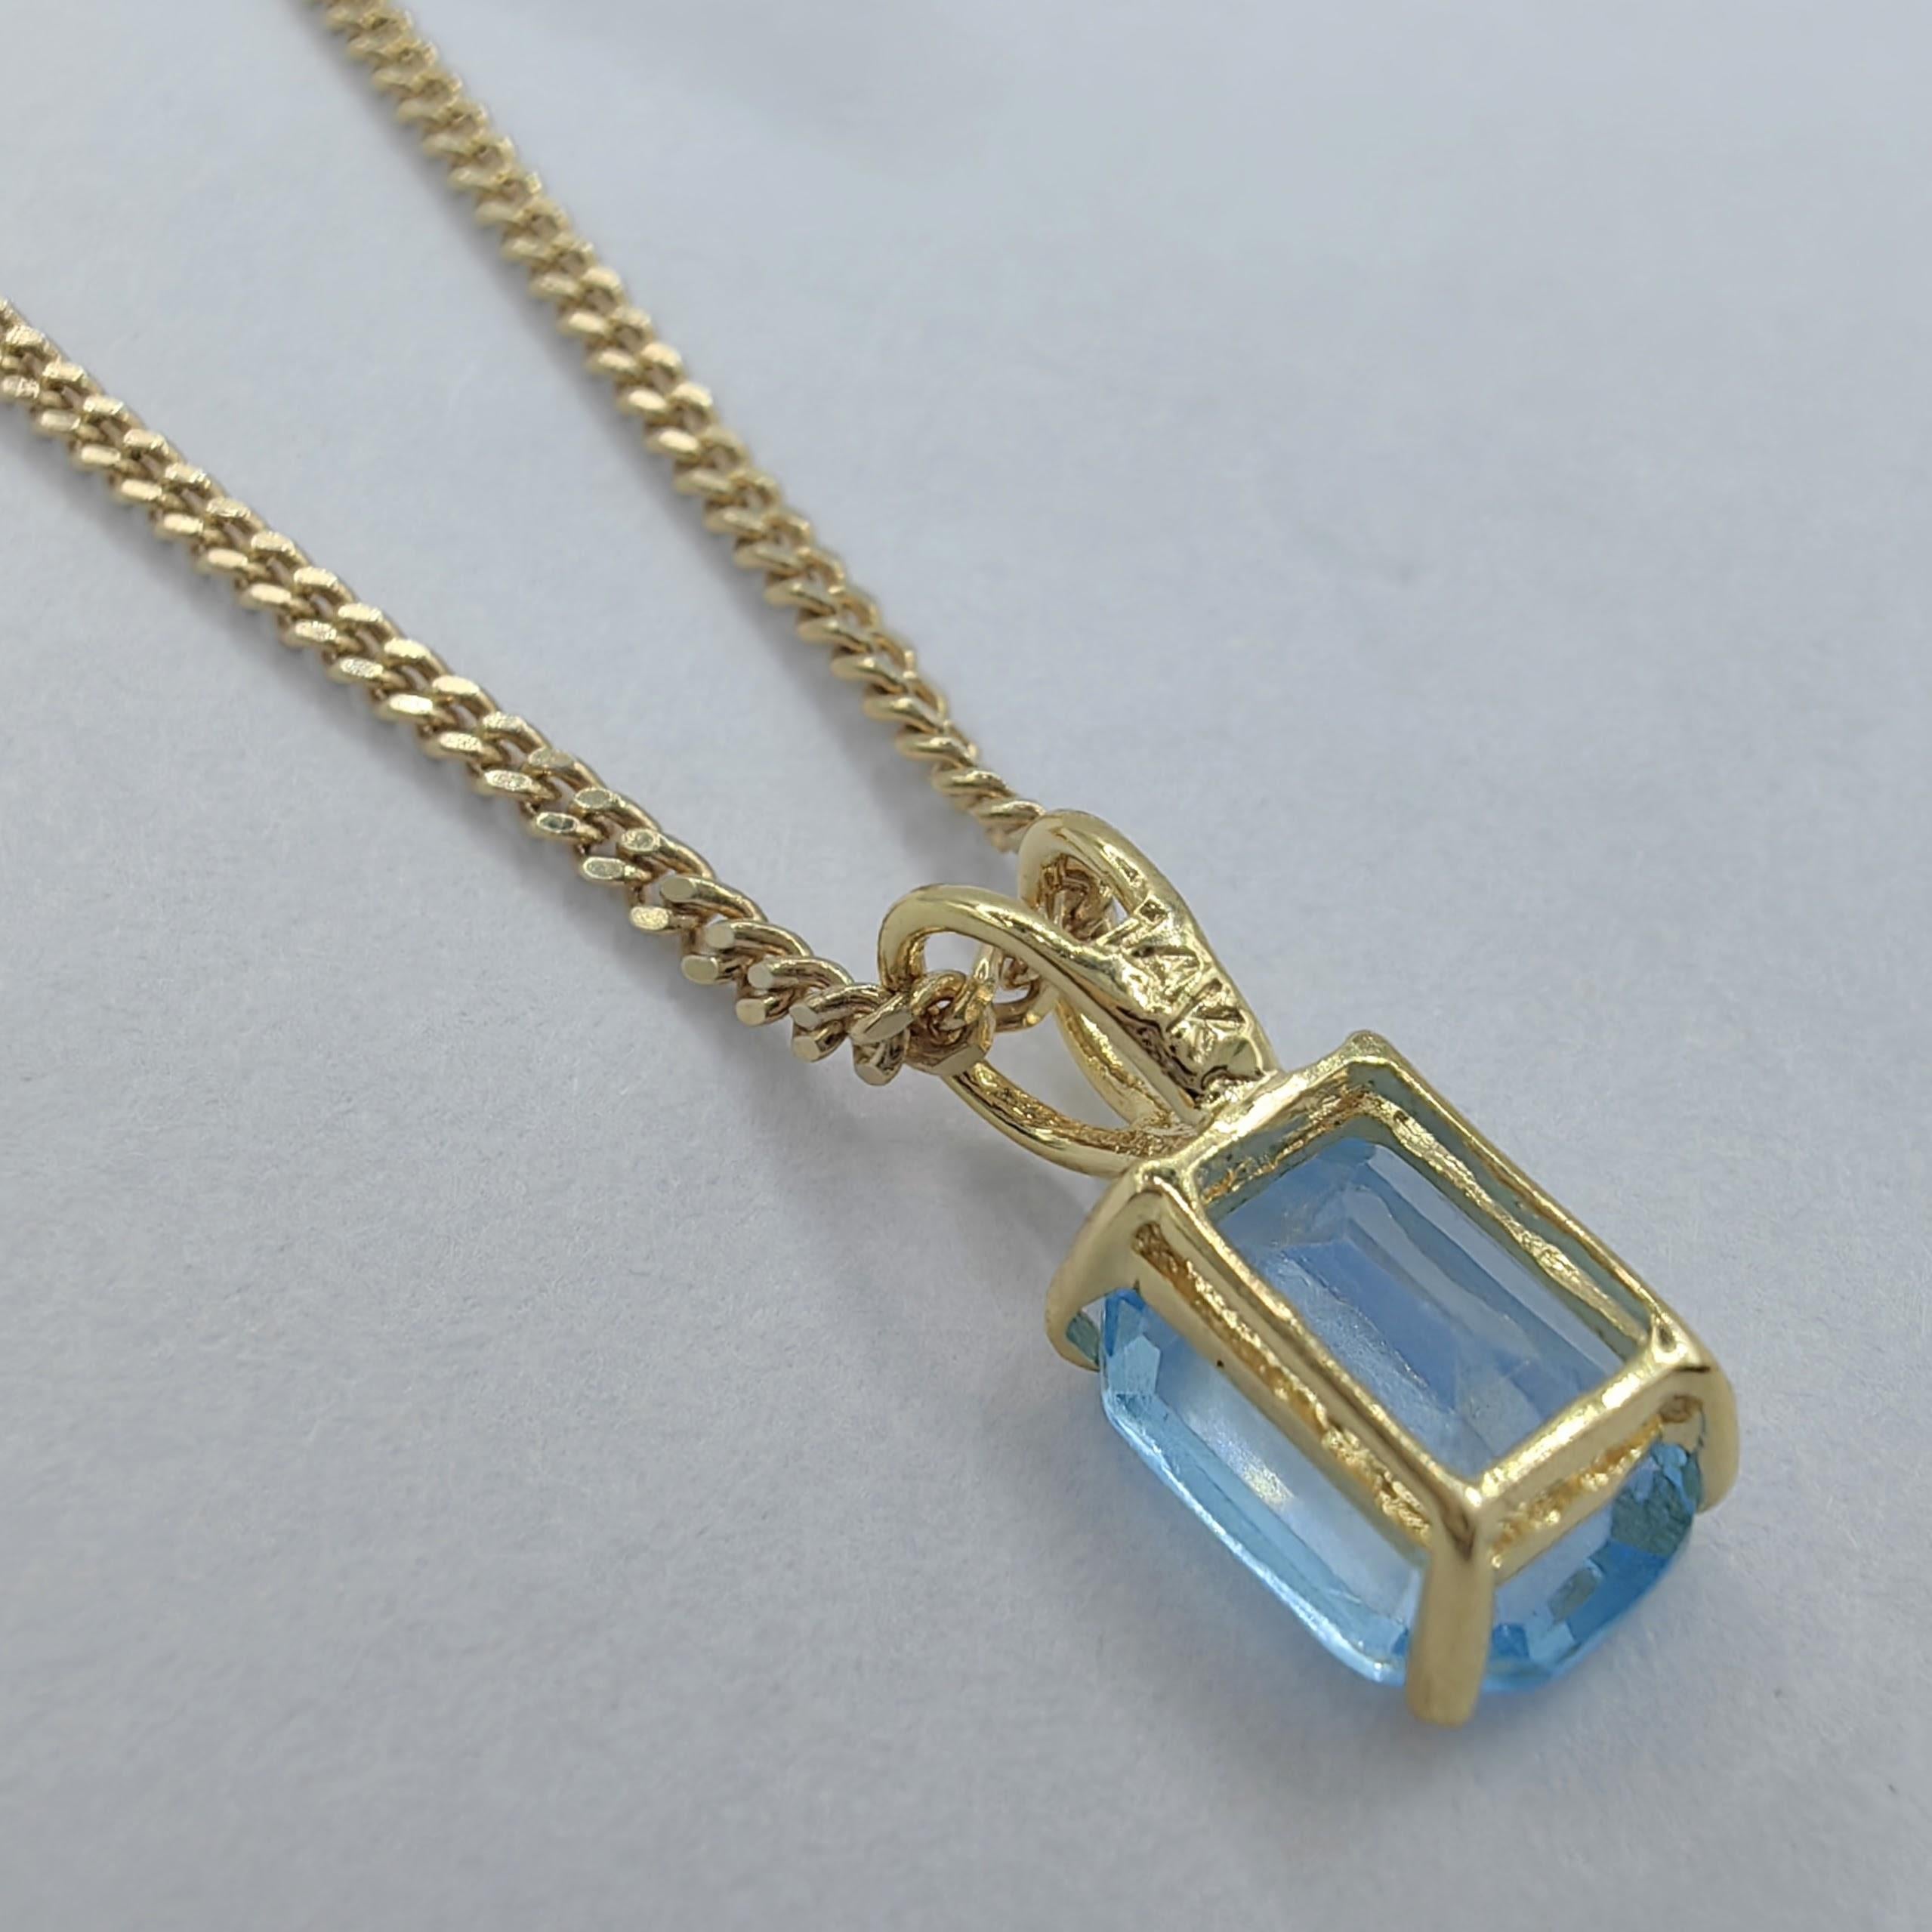 Women's Vintage 1980's Emerald Cut Blue Topaz Necklace Pendant in 14K Yellow Gold #2 For Sale